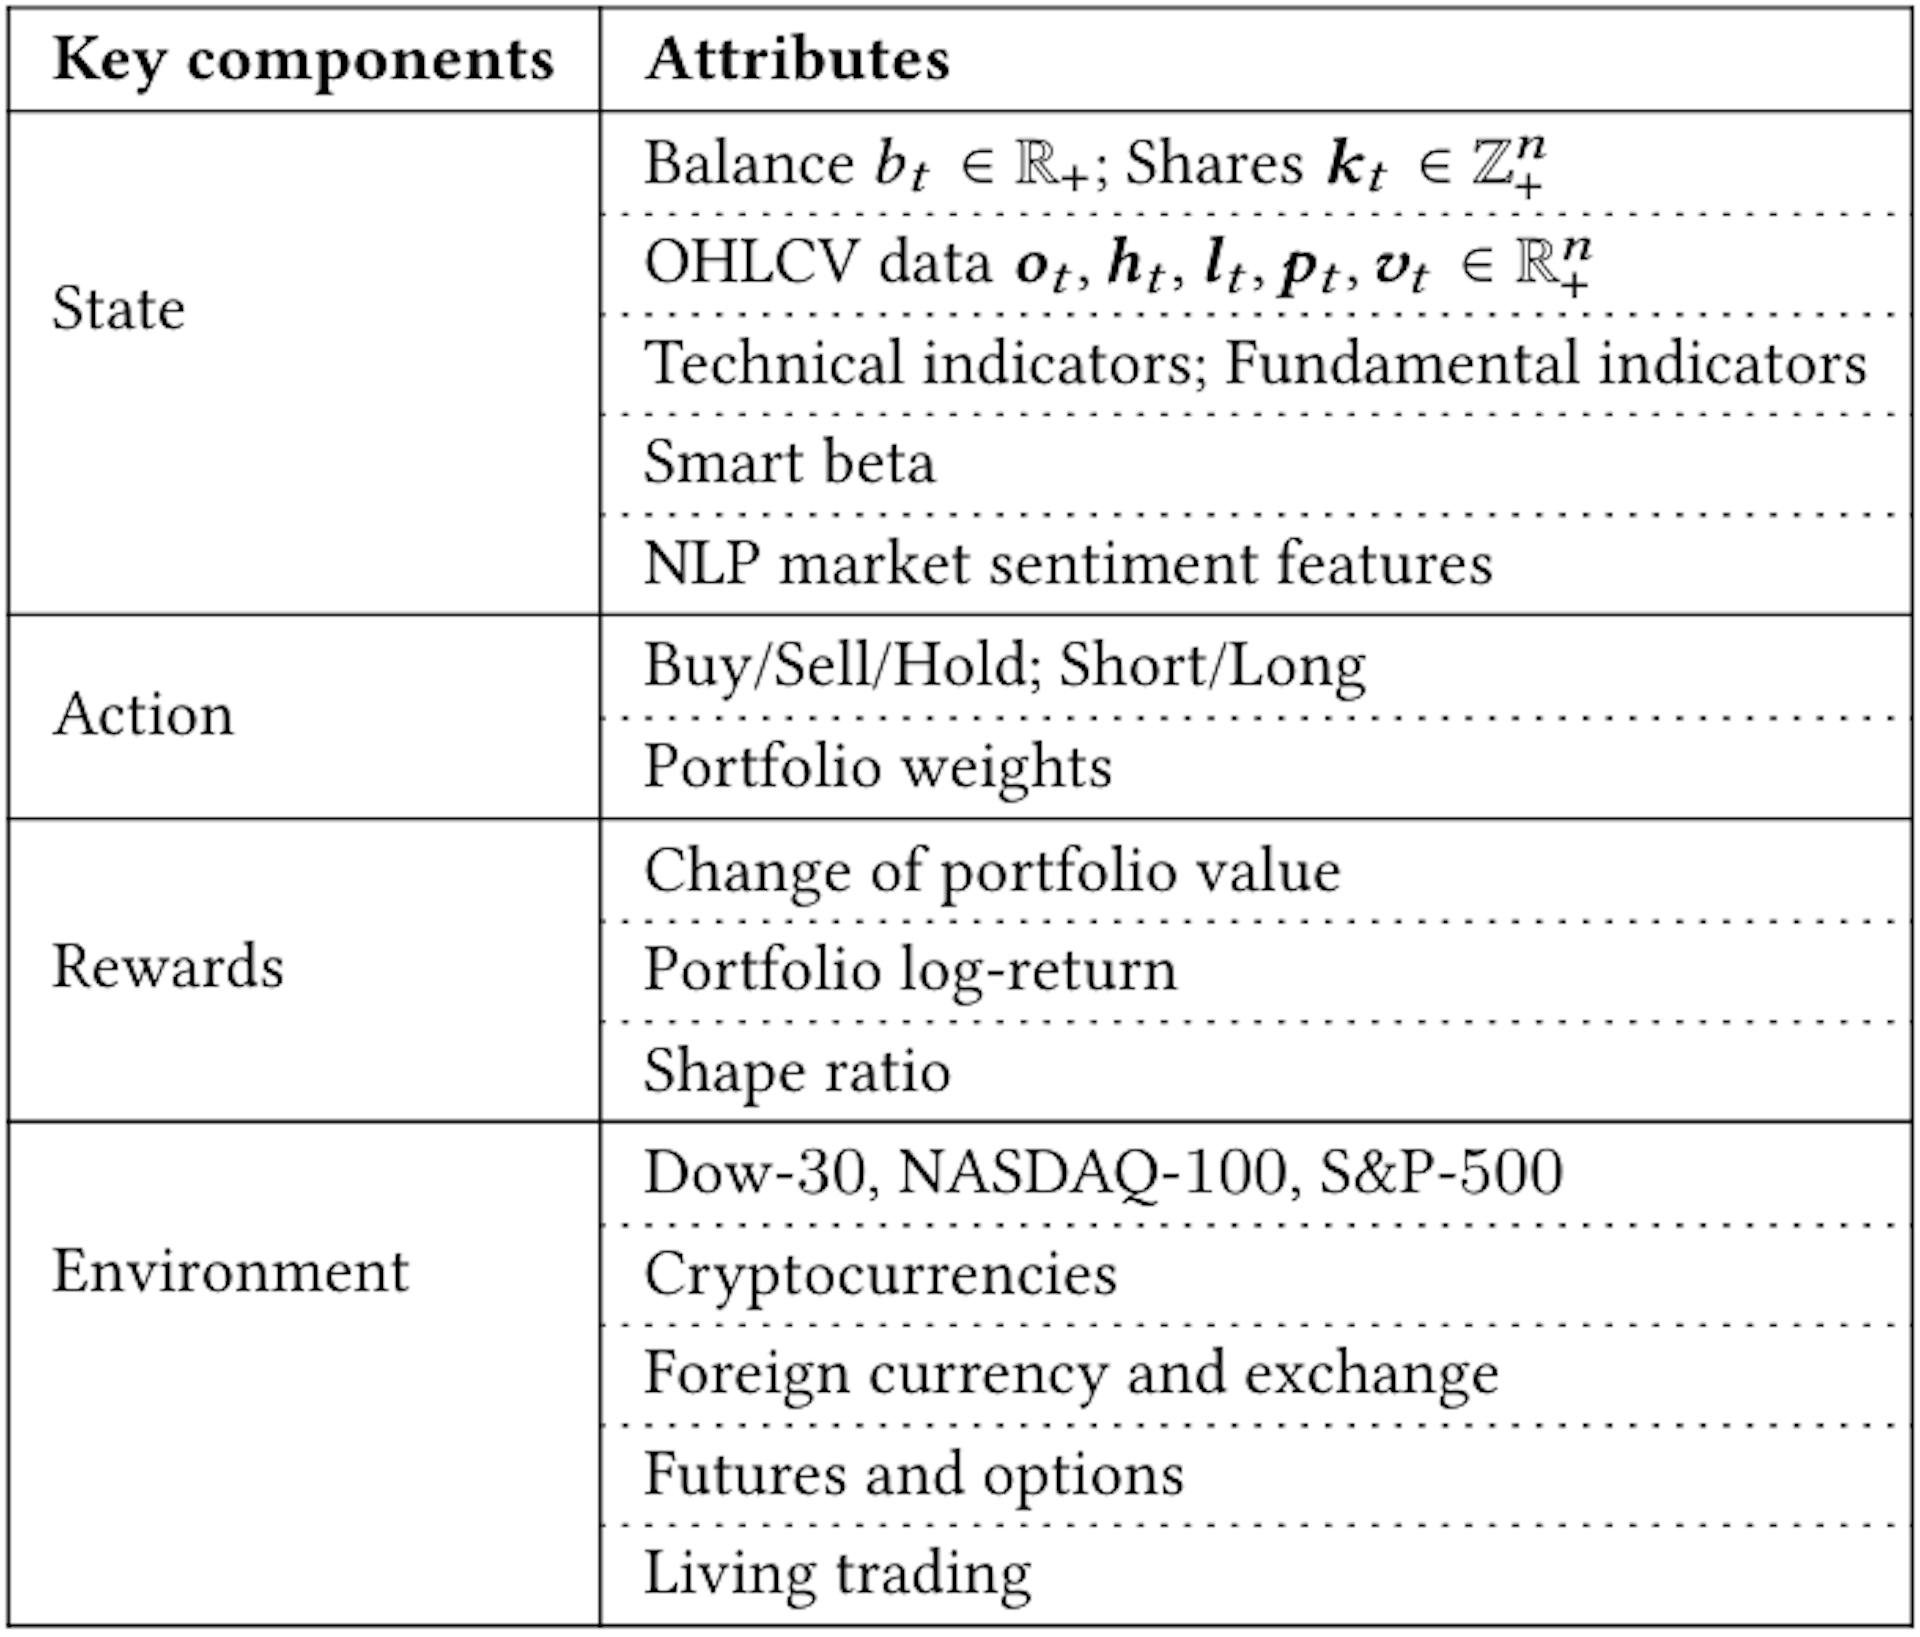 Table 1: Key components and attributes. OHLCV stands for Open, High, Low, Close and Volume.